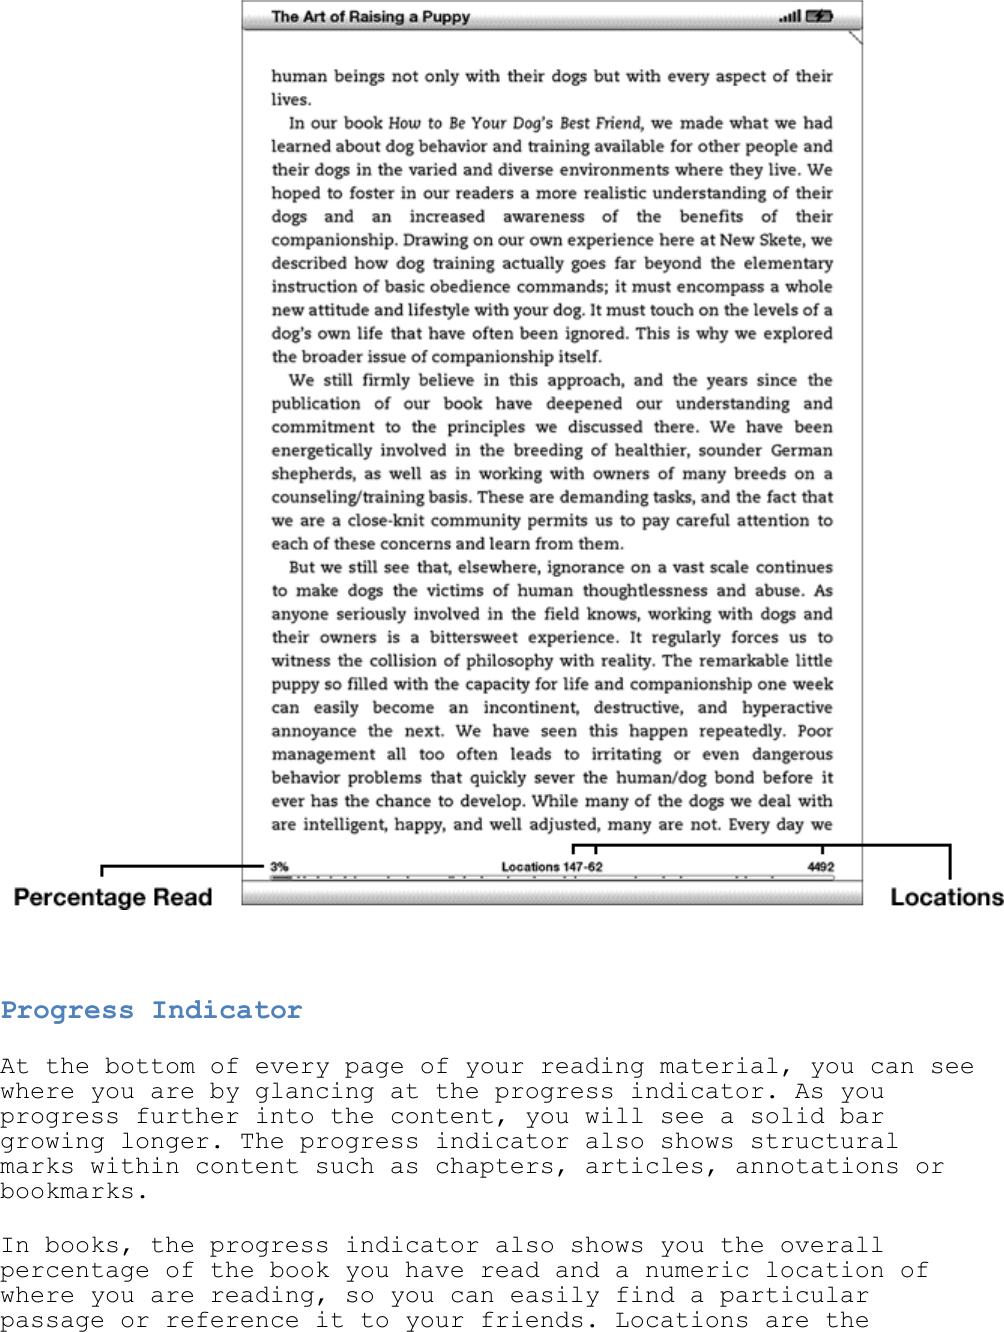     Progress Indicator At the bottom of every page of your reading material, you can see where you are by glancing at the progress indicator. As you progress further into the content, you will see a solid bar growing longer. The progress indicator also shows structural marks within content such as chapters, articles, annotations or bookmarks. In books, the progress indicator also shows you the overall percentage of the book you have read and a numeric location of where you are reading, so you can easily find a particular passage or reference it to your friends. Locations are the 